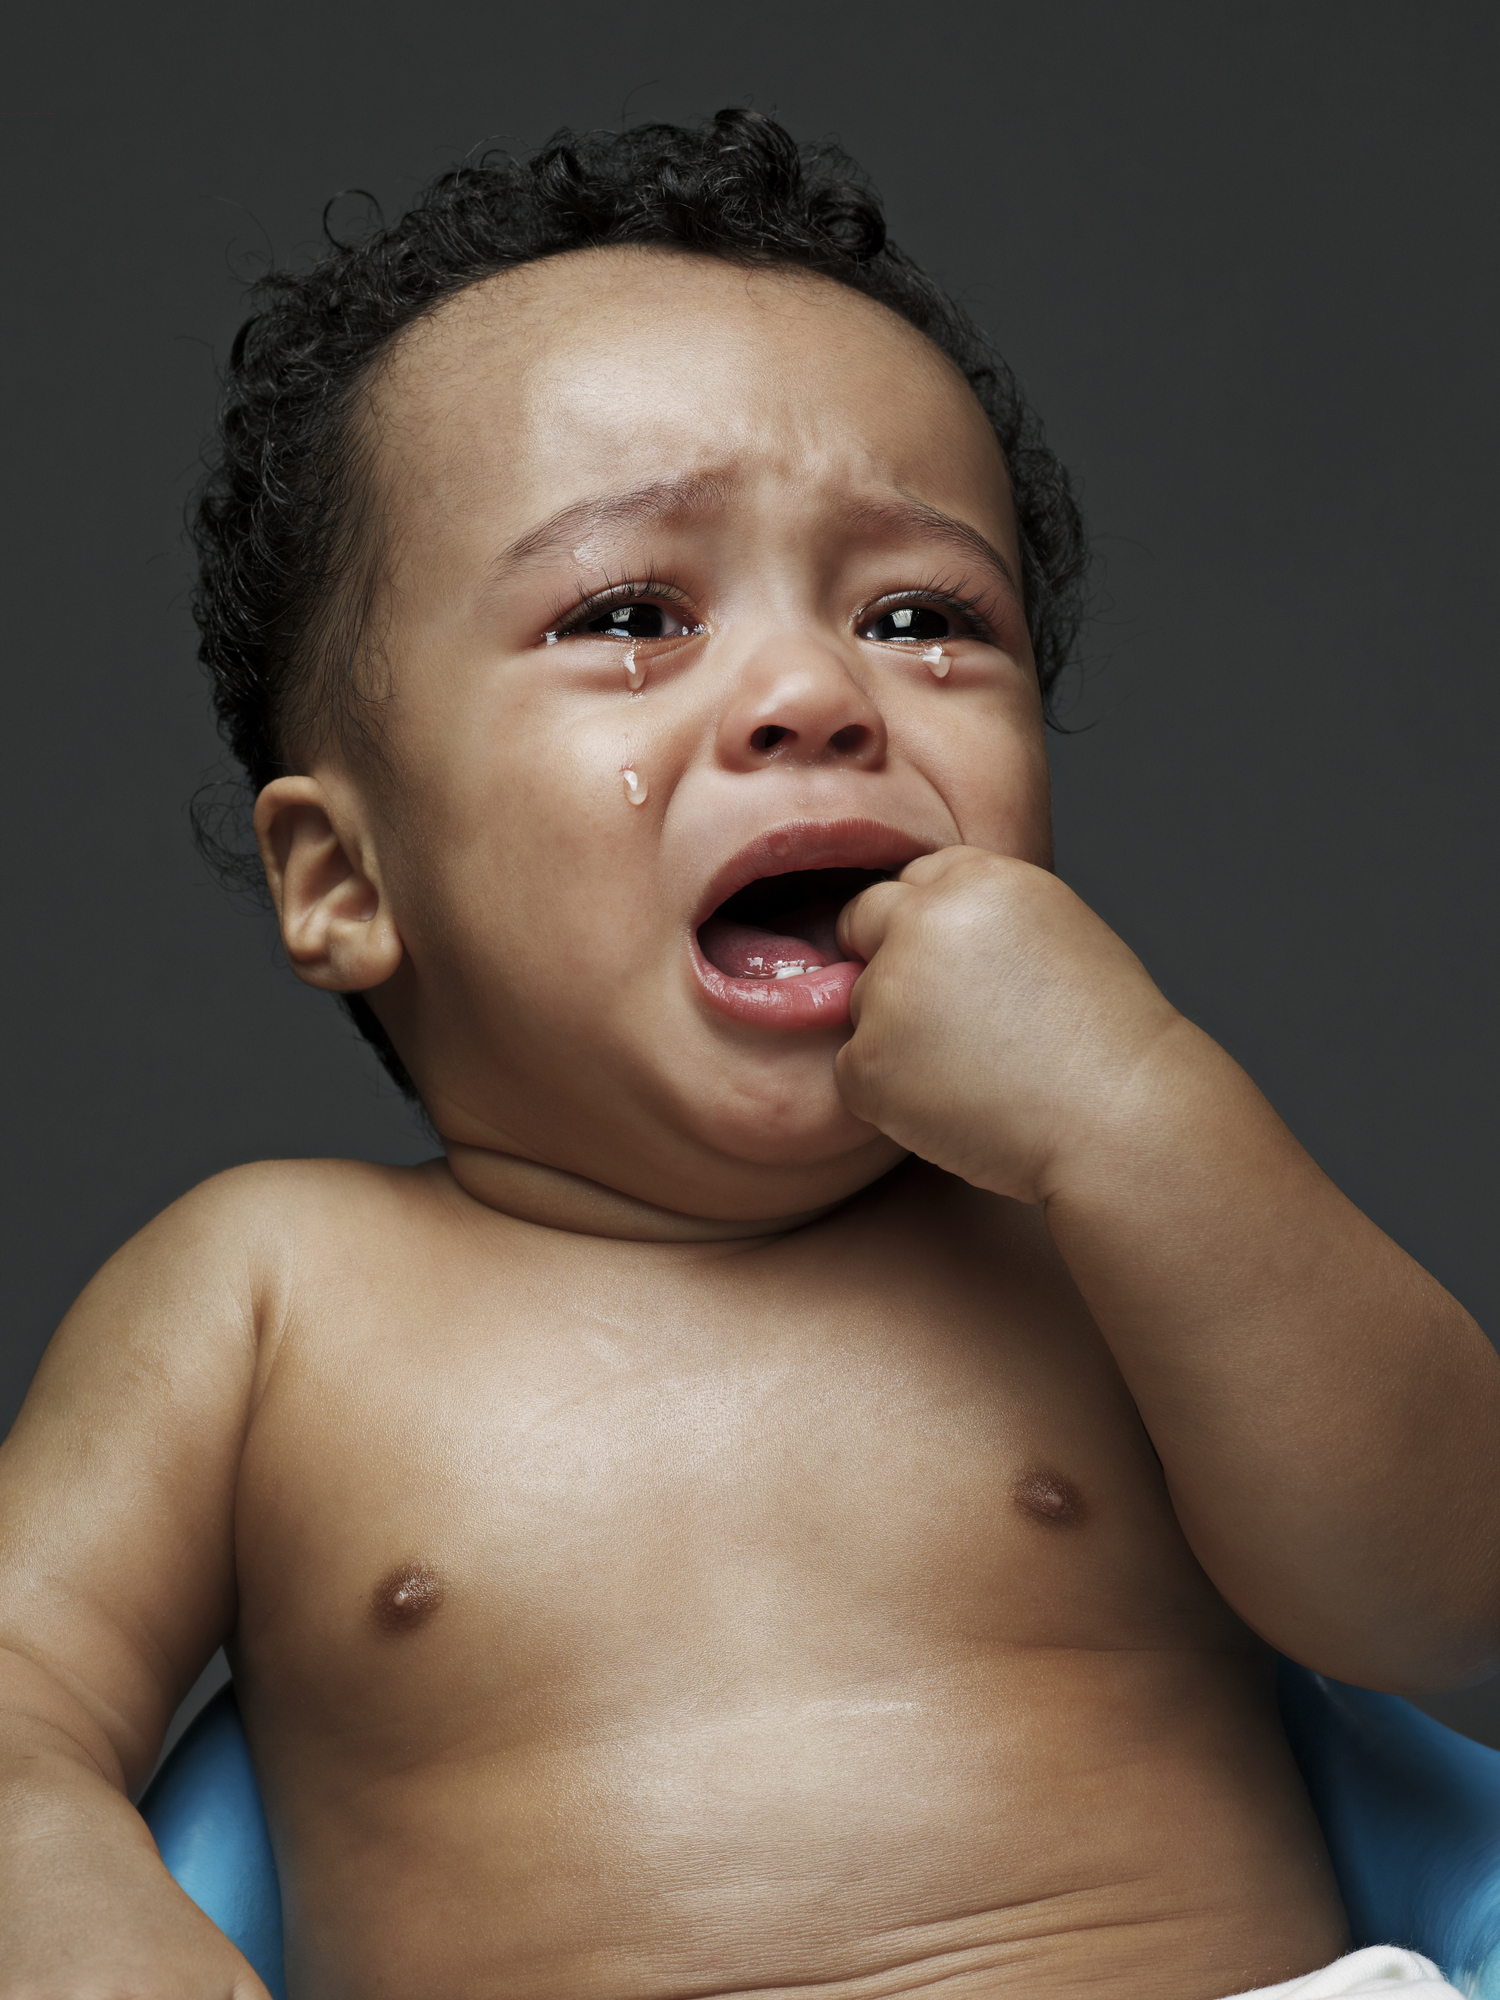 Closeup of a crying baby